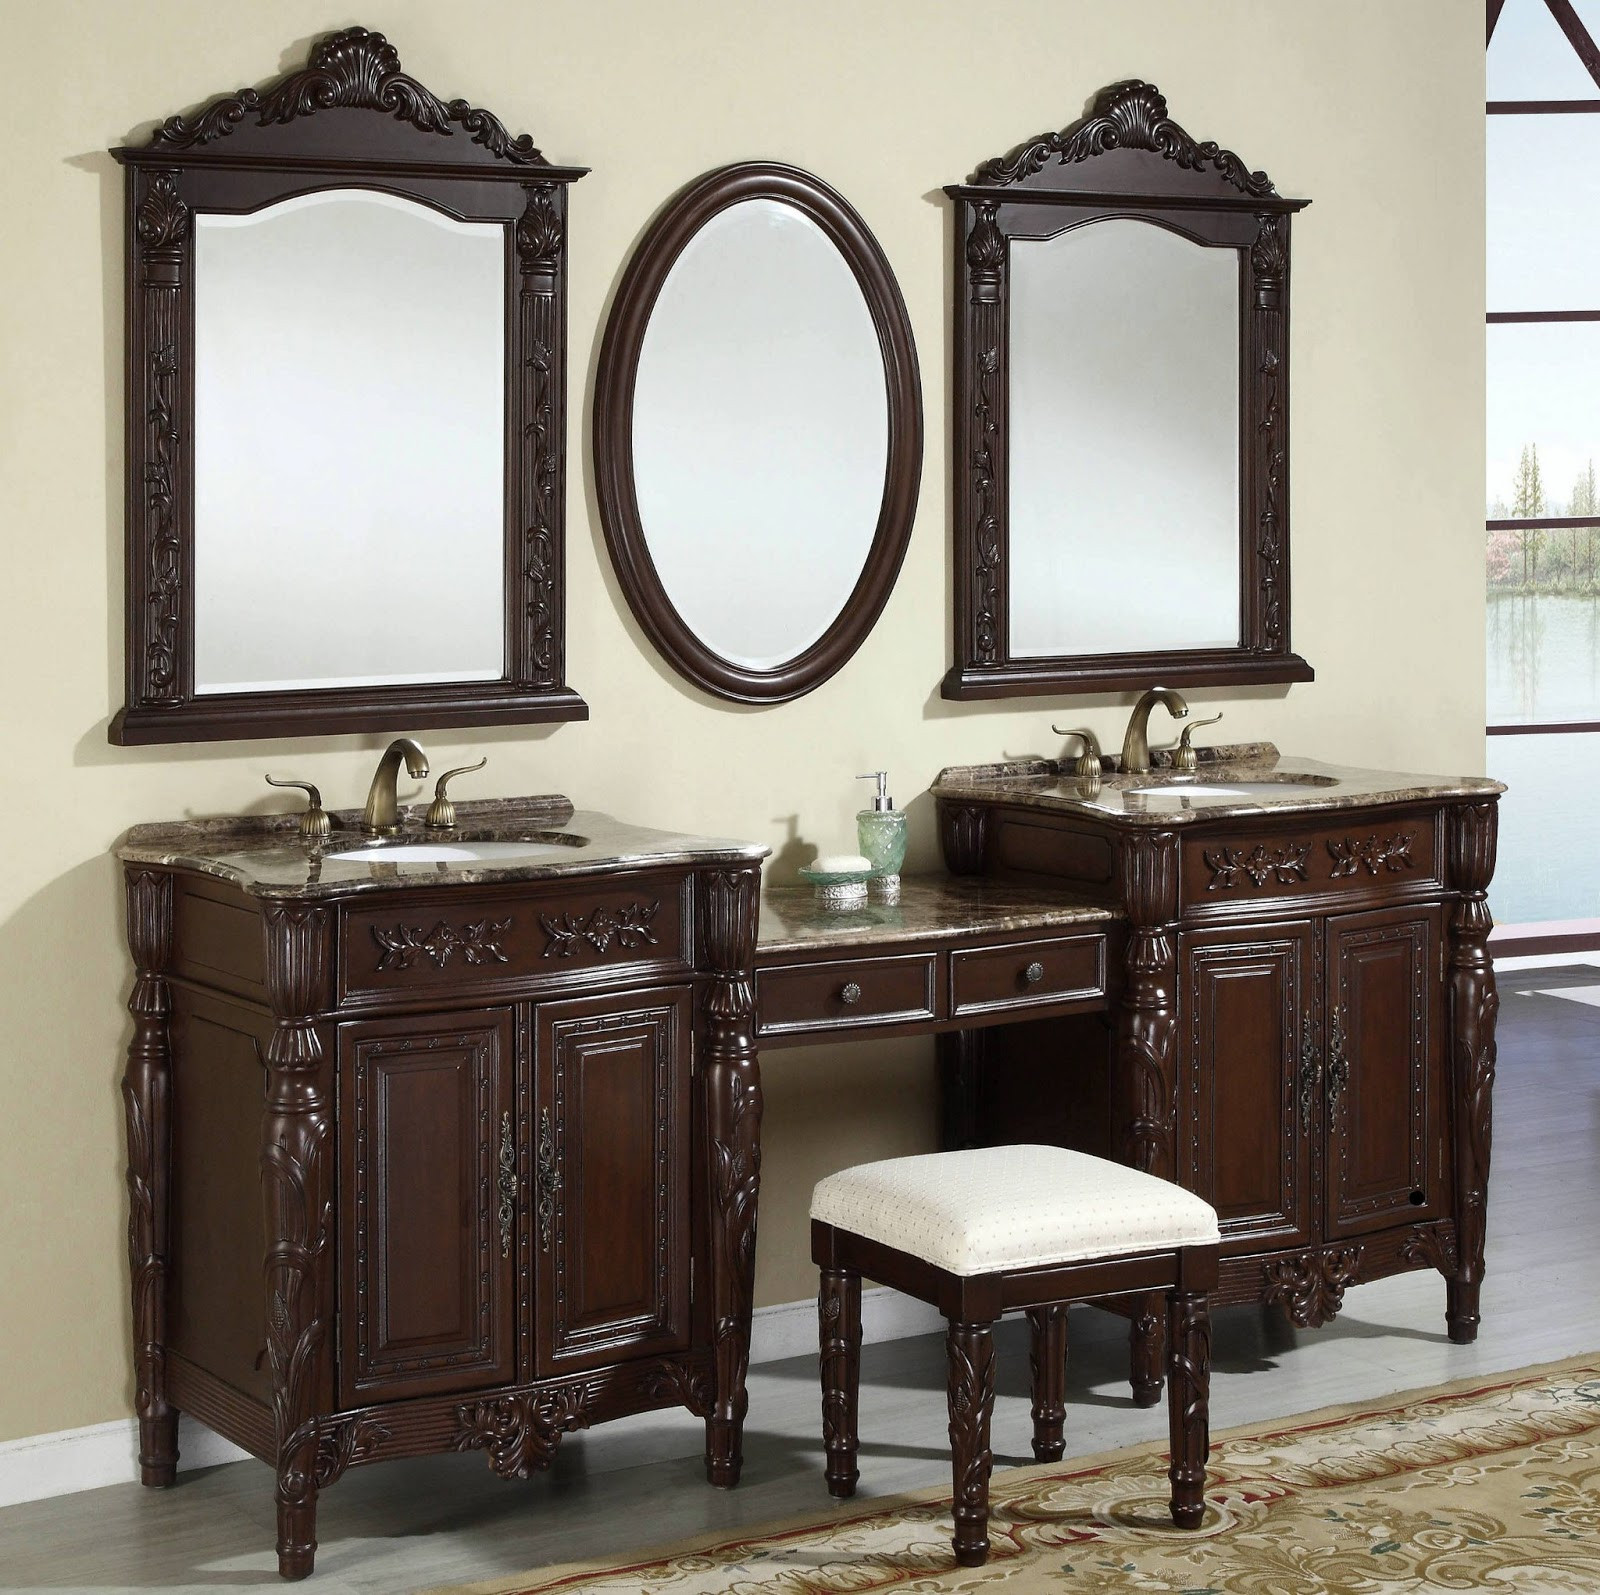 Bathroom Vanity Mirror
 Bathroom Vanity Mirrors Models and Buying Tips Cabinets